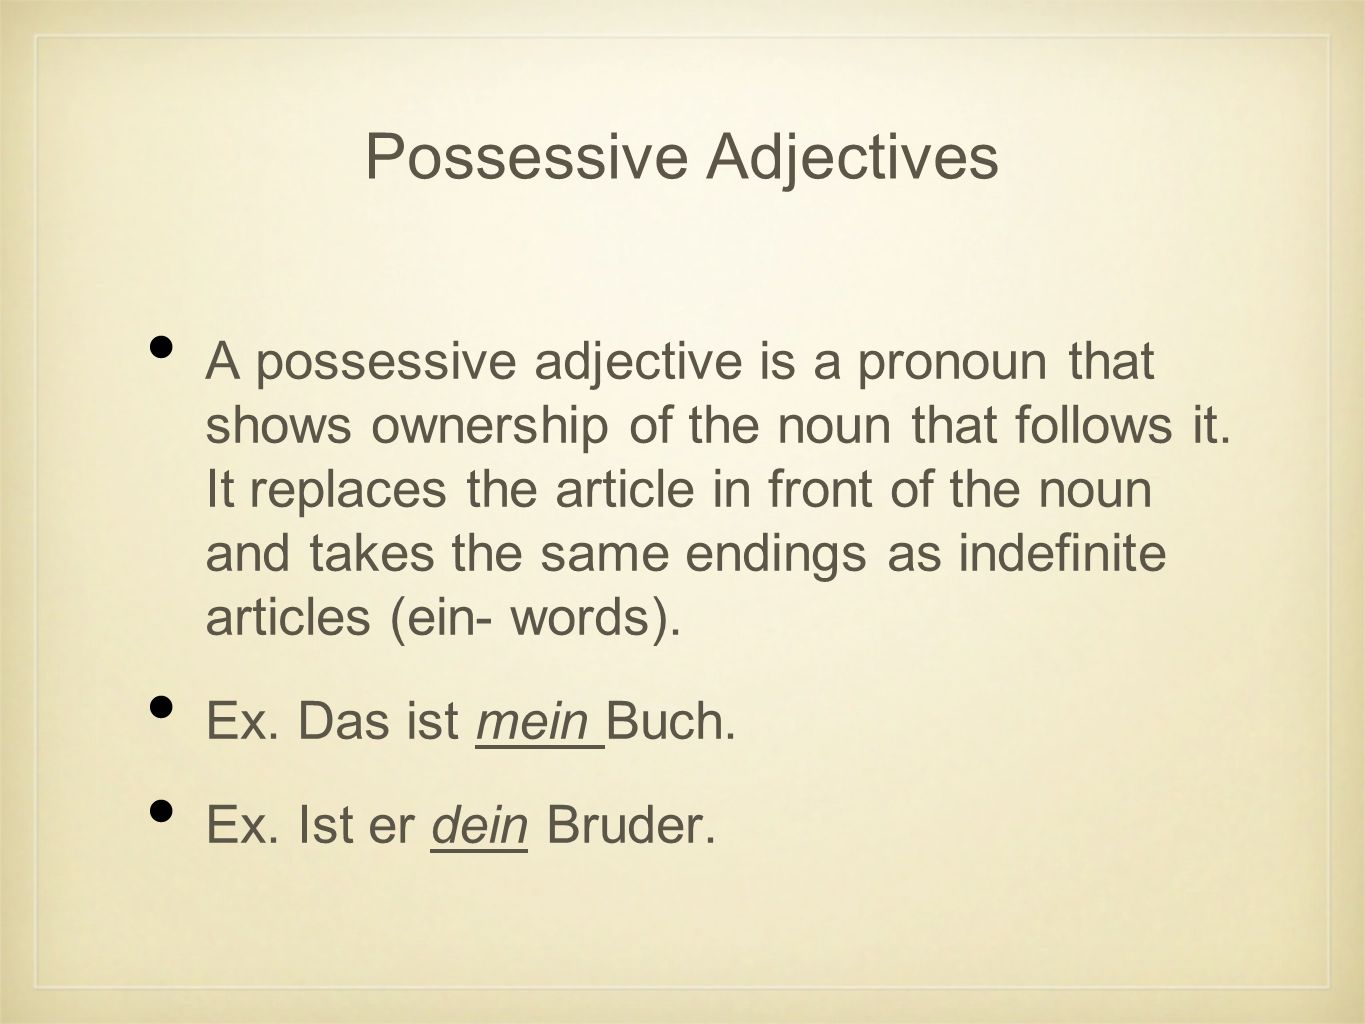 Possessive Adjectives A possessive adjective is a pronoun that shows ownership of the noun that follows it.